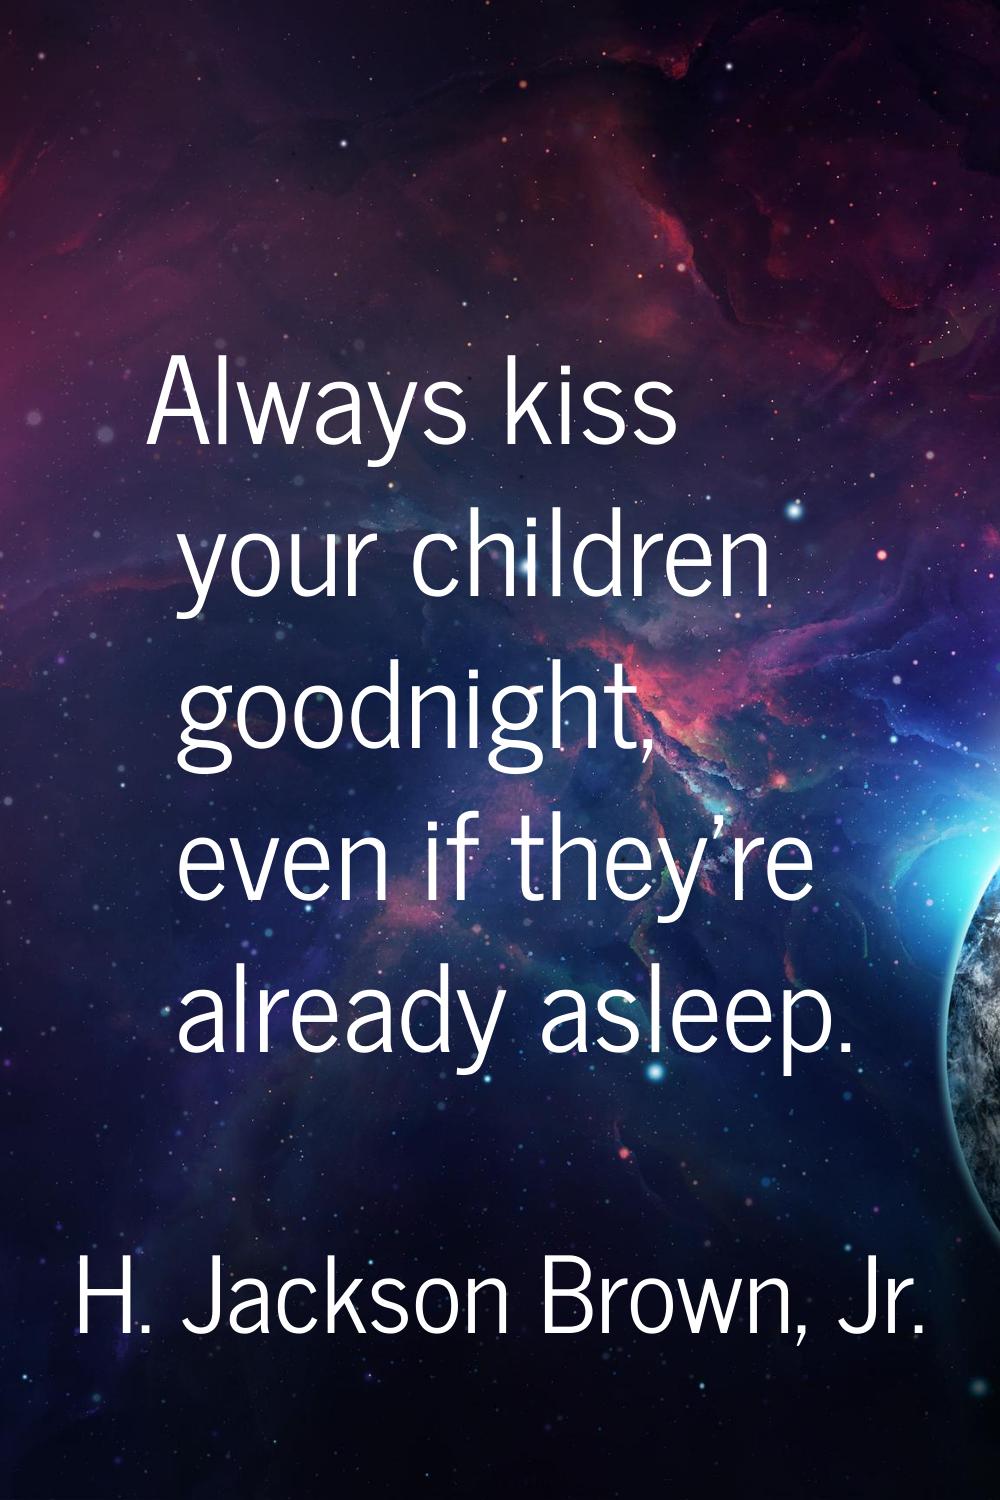 Always kiss your children goodnight, even if they're already asleep.